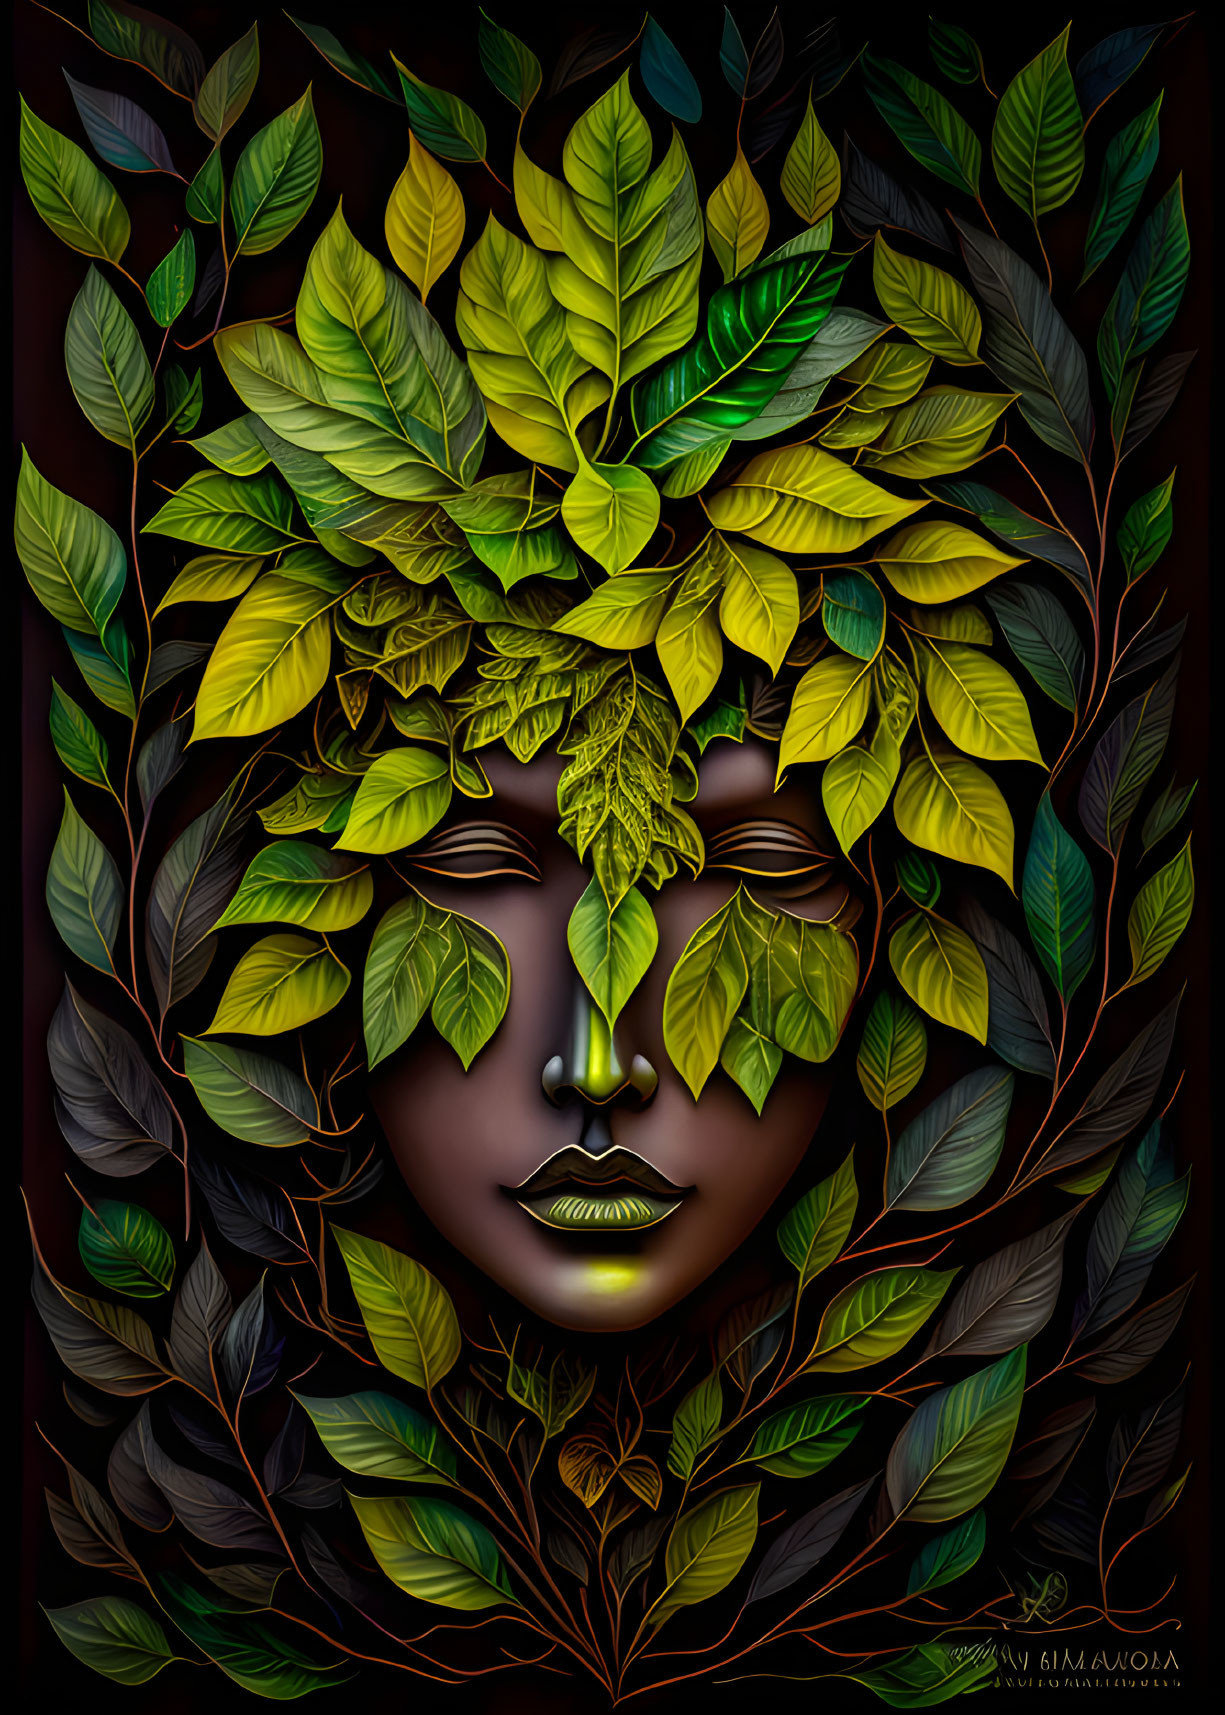 Serene face surrounded by vibrant leaves on dark background